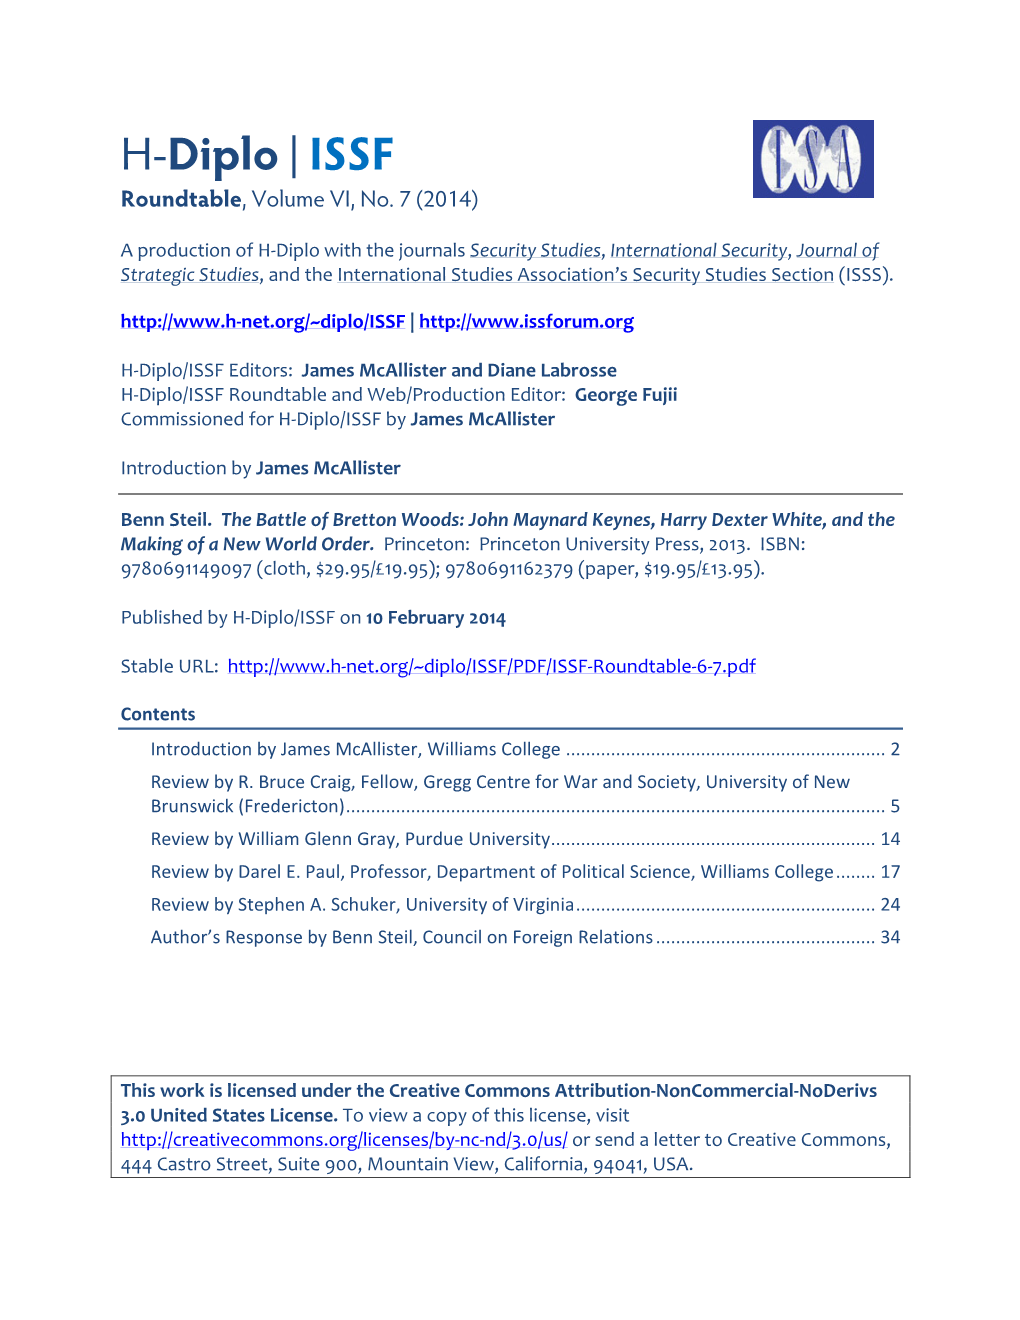 H-Diplo/ISSF Roundtable, Vol. 6, No. 7 (2014)